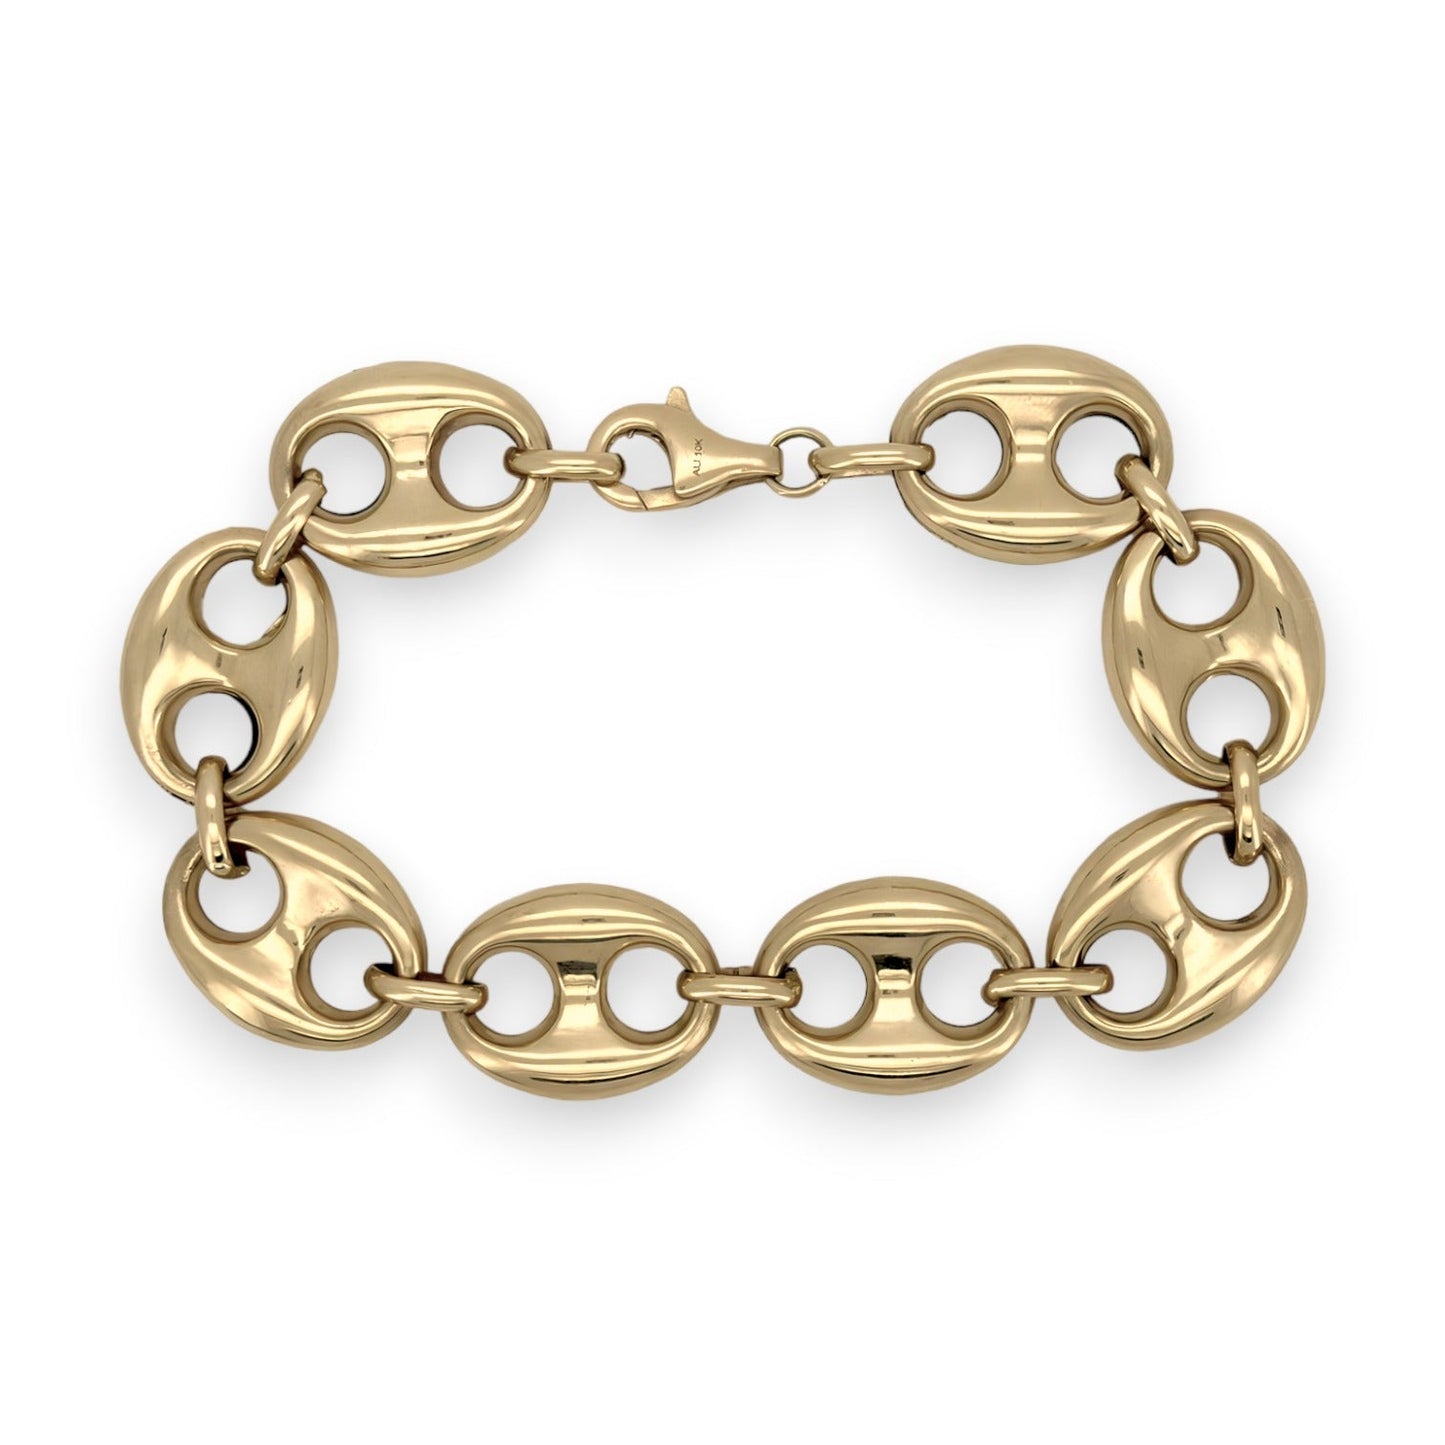 Puffed Gucci Link Chain Bracelet - 14K Yellow Gold - Hollow